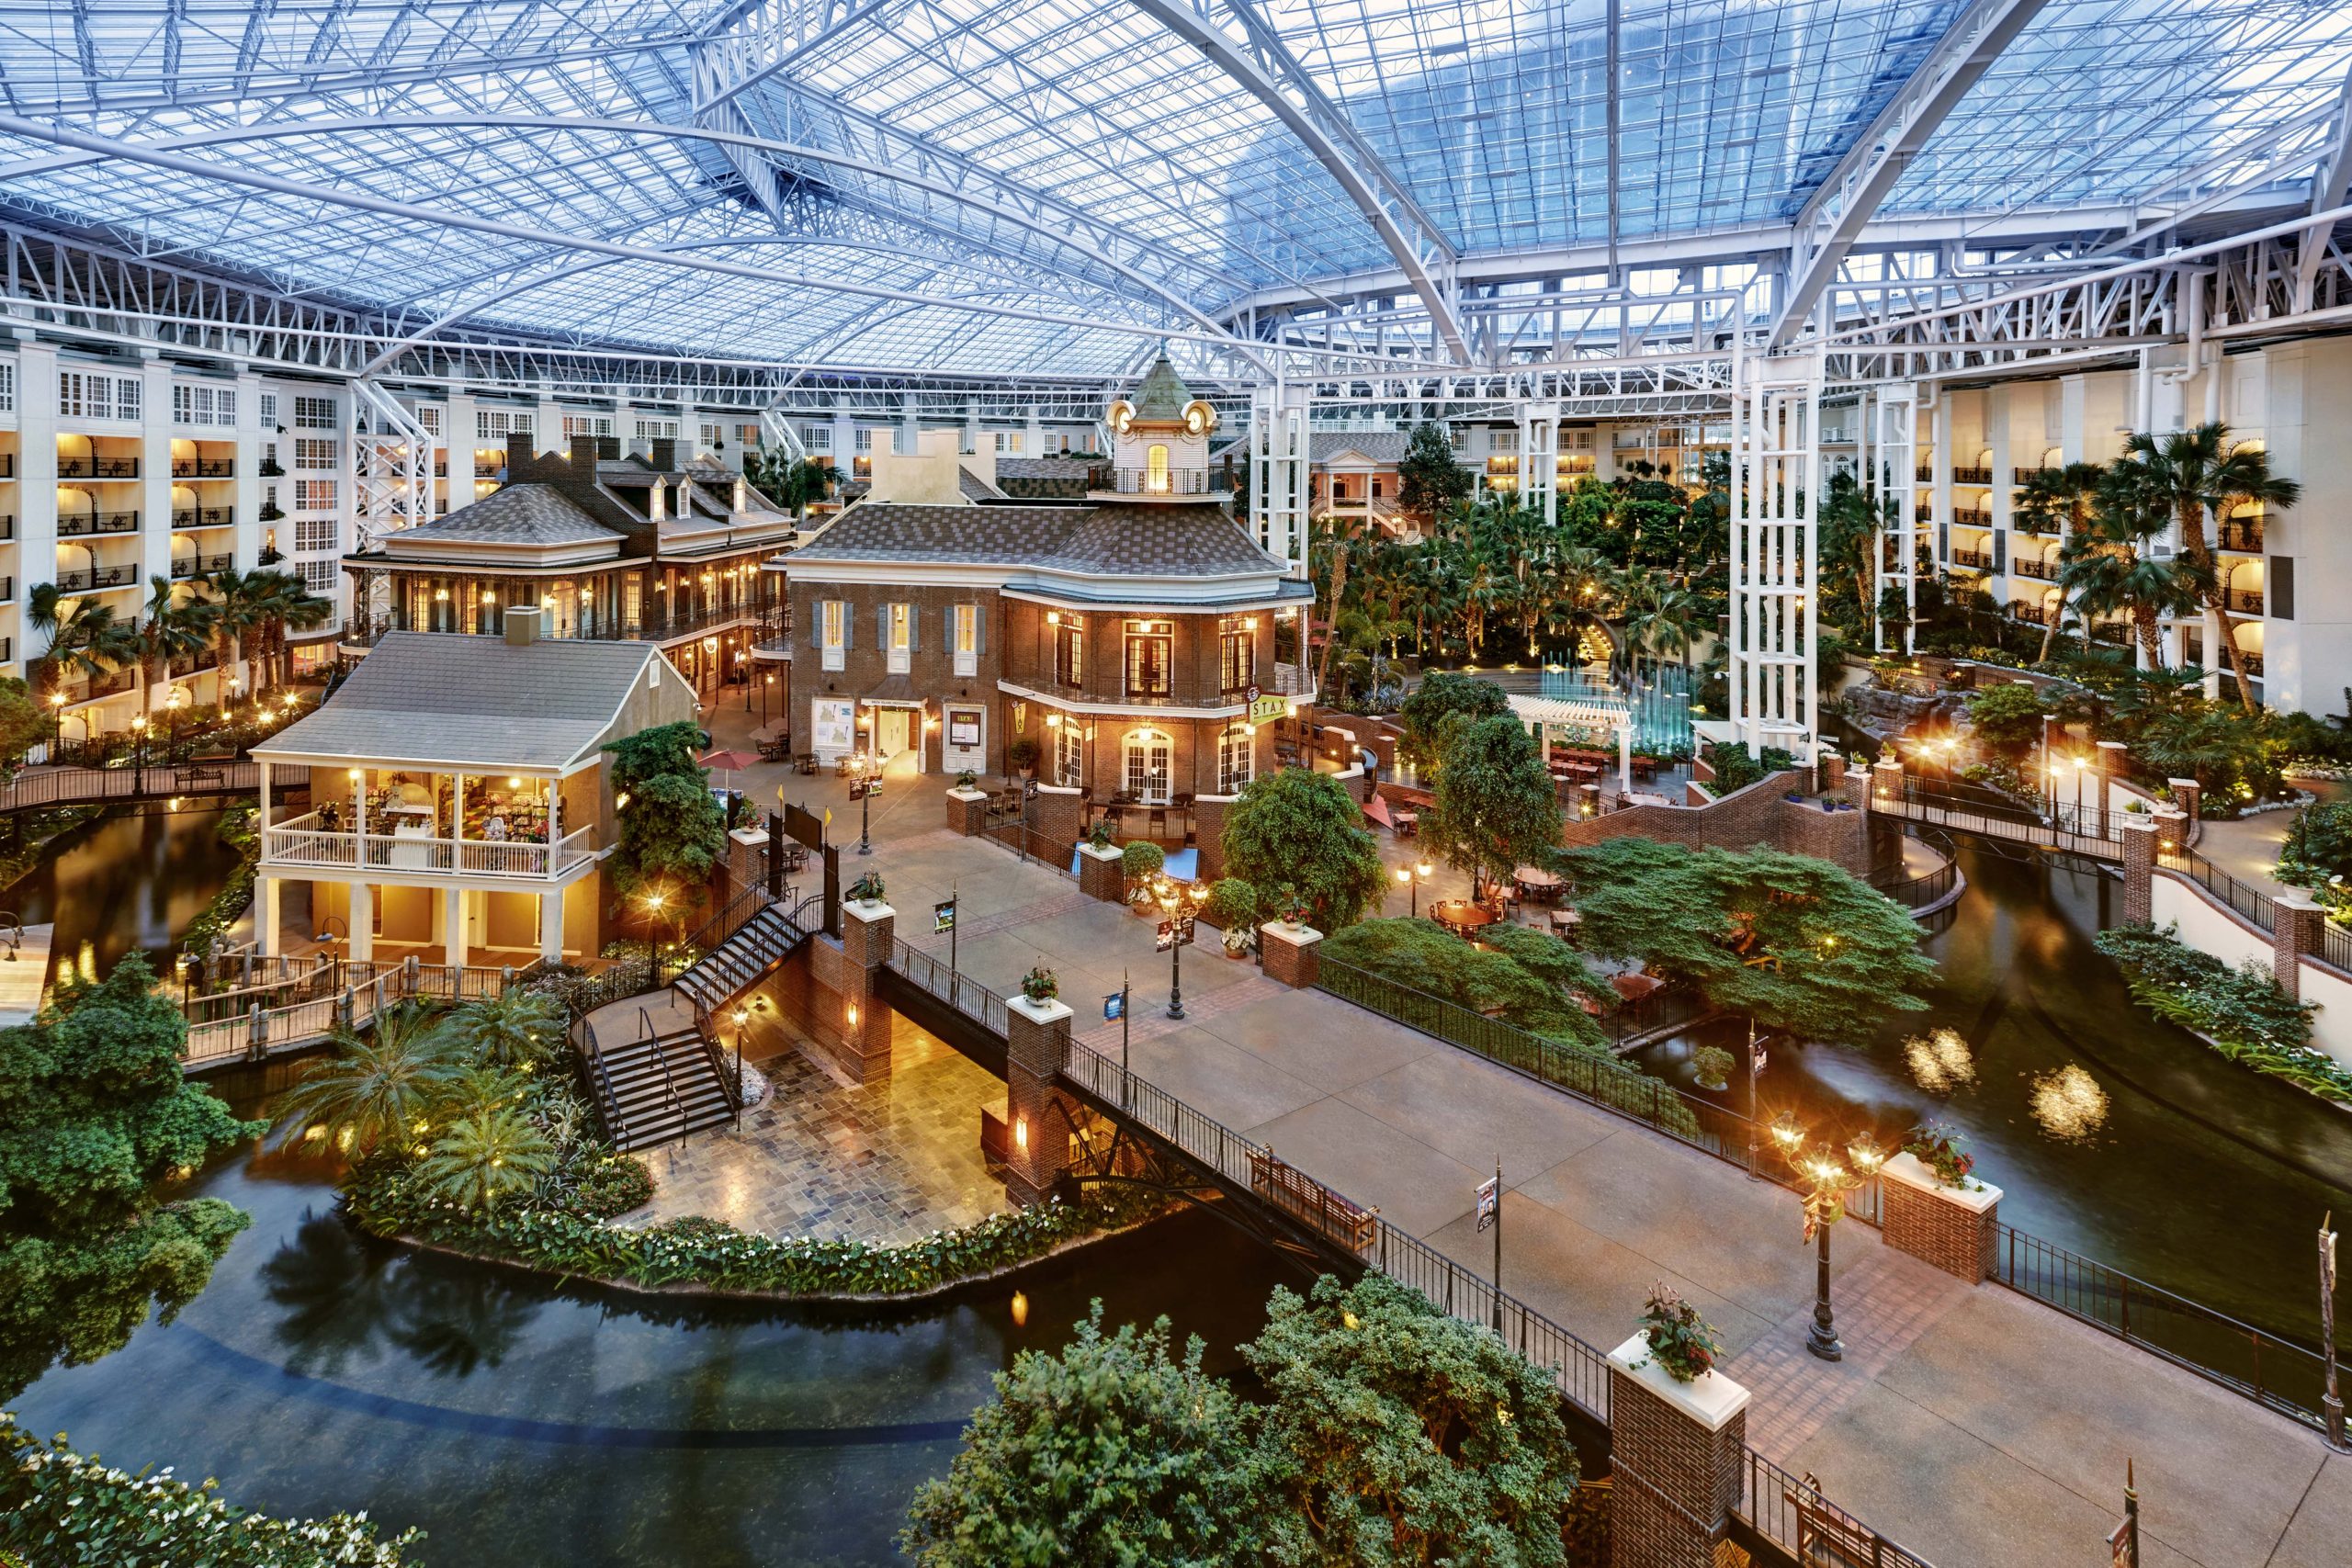 What all does Opryland Hotel have?